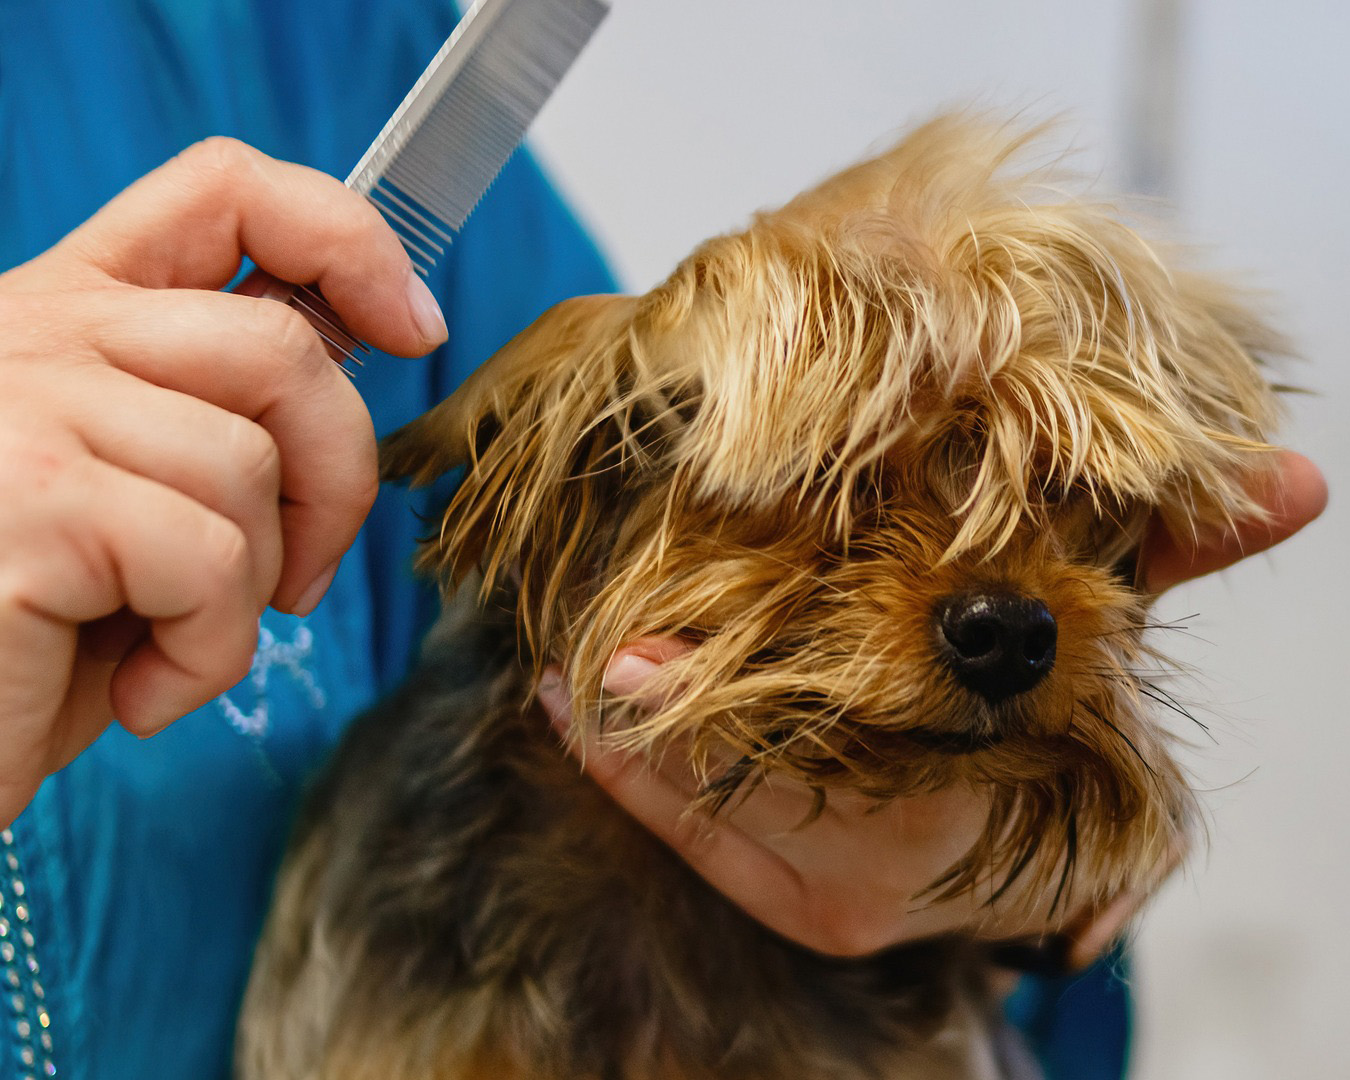 A terrier dog getting their face hair styled at the grooming salon